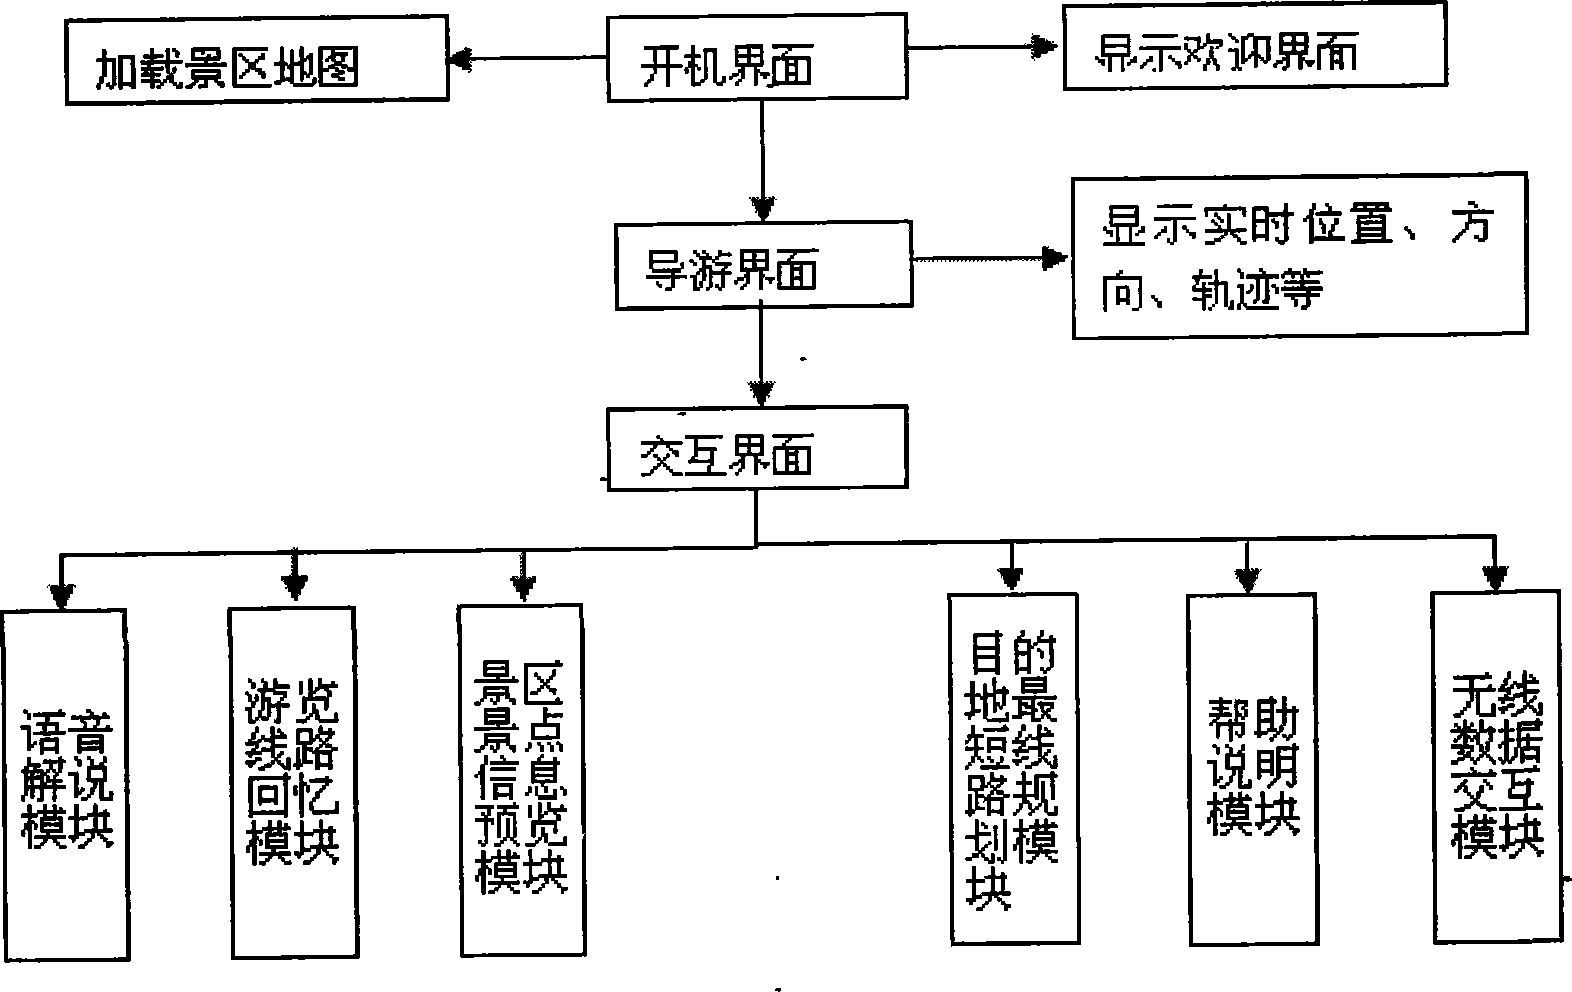 Intelligent tourist guide system and method